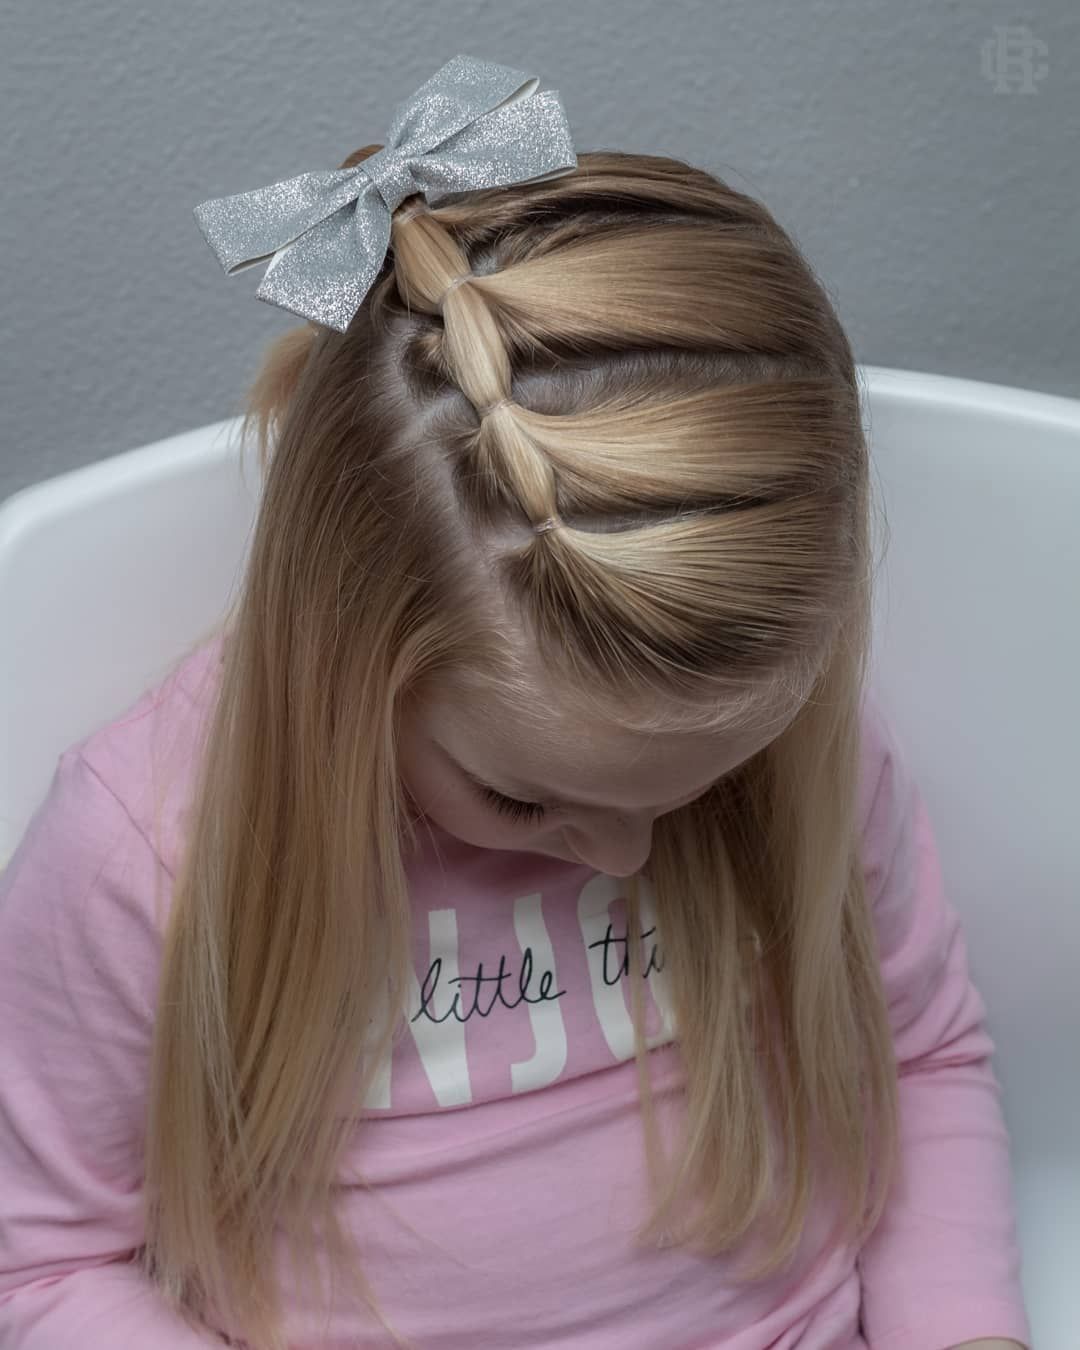 160 Braids Hairstyle Ideas for Little Kids 2019 -   11 hairstyles For Kids watches
 ideas